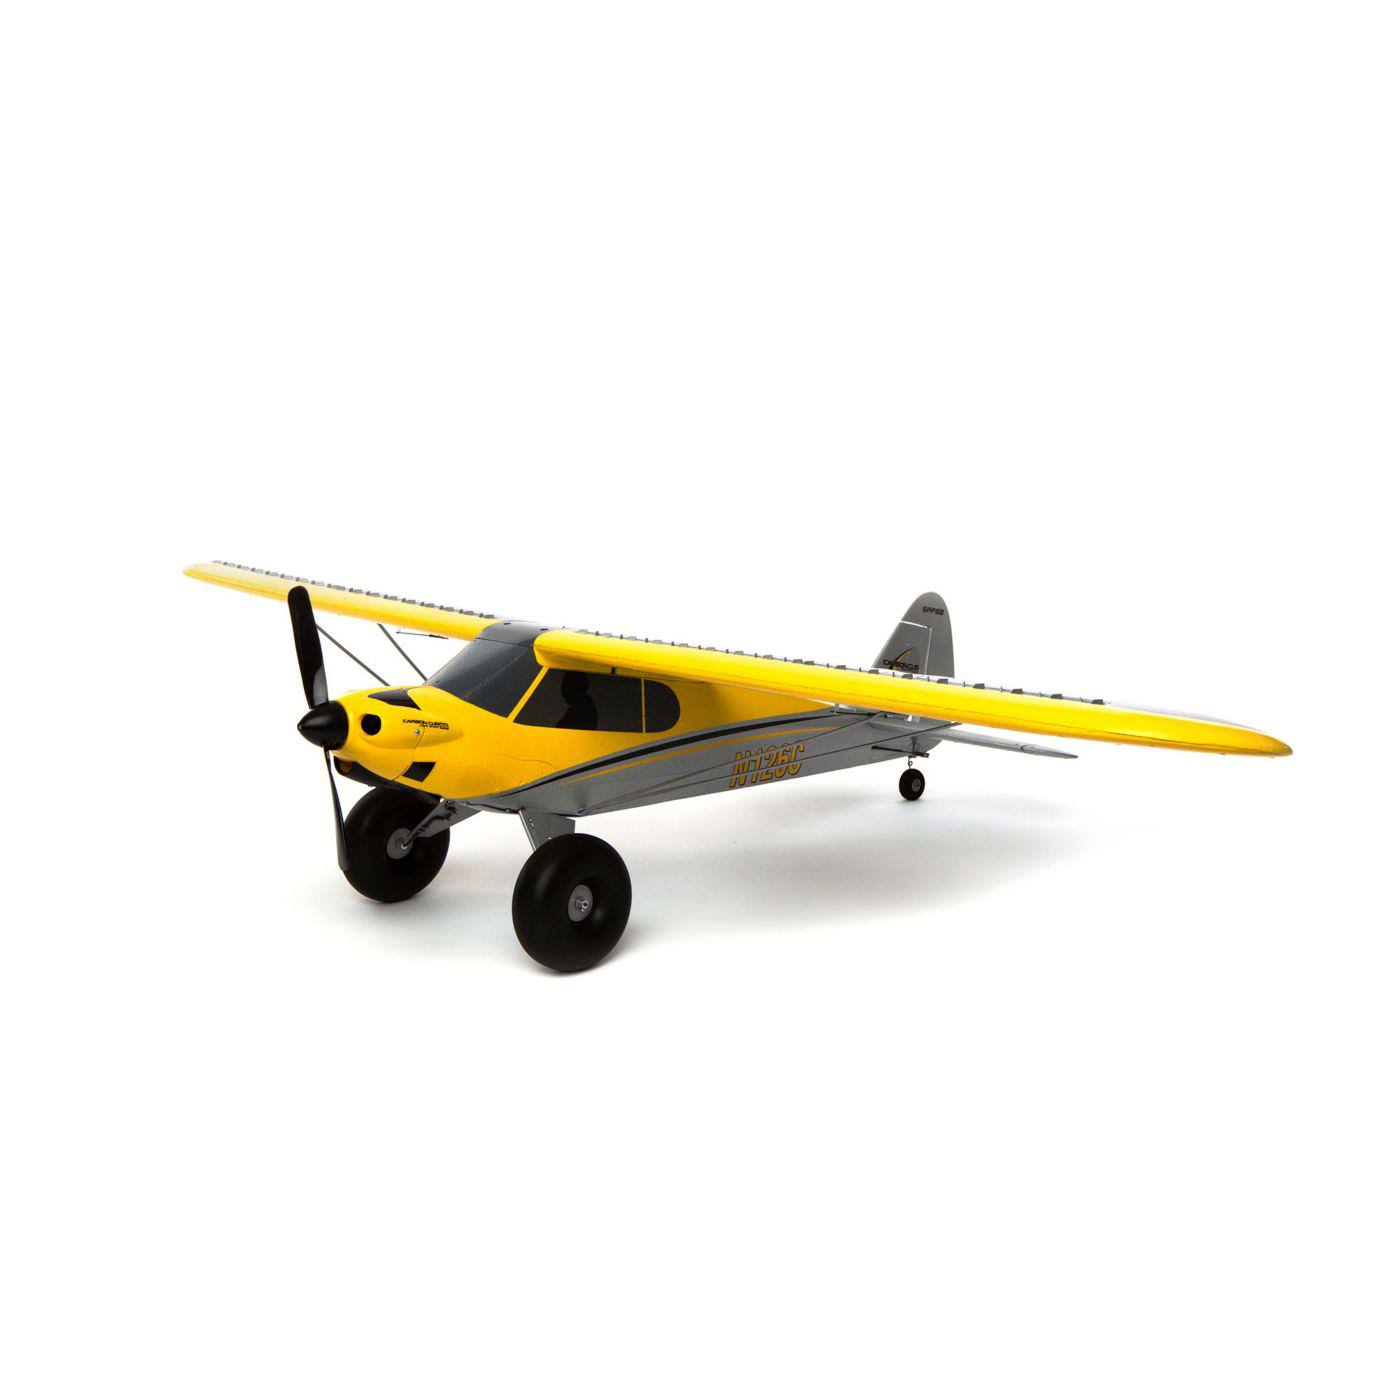 HobbyZone HBZ32500 - Carbon Cub S 2 1.3m BNF Basic with Safe